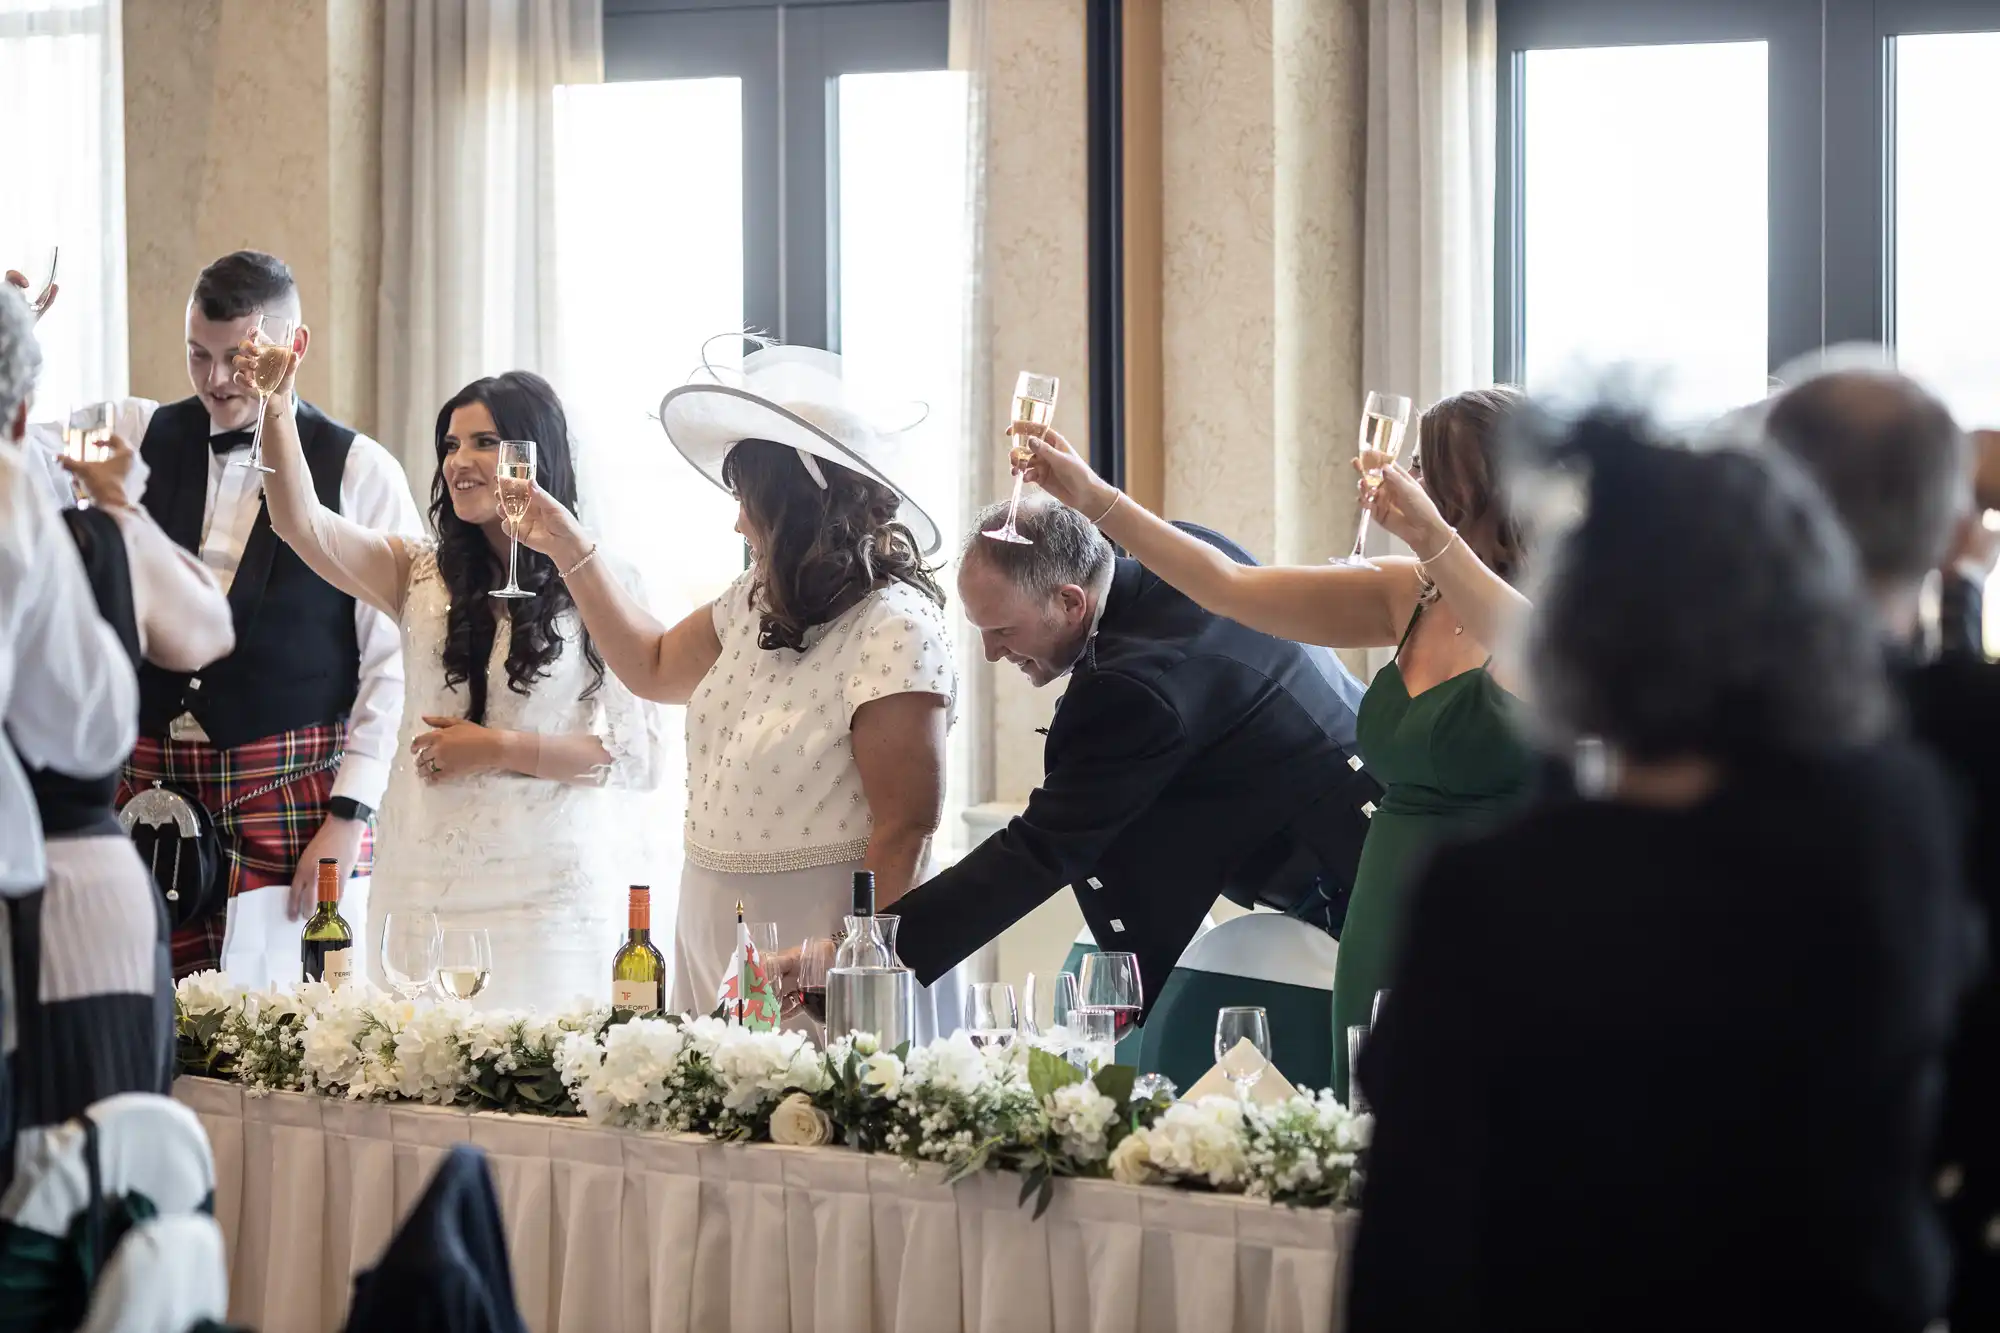 Wedding guests standing and toasting at a reception table, with a bride and groom happily raising their glasses.